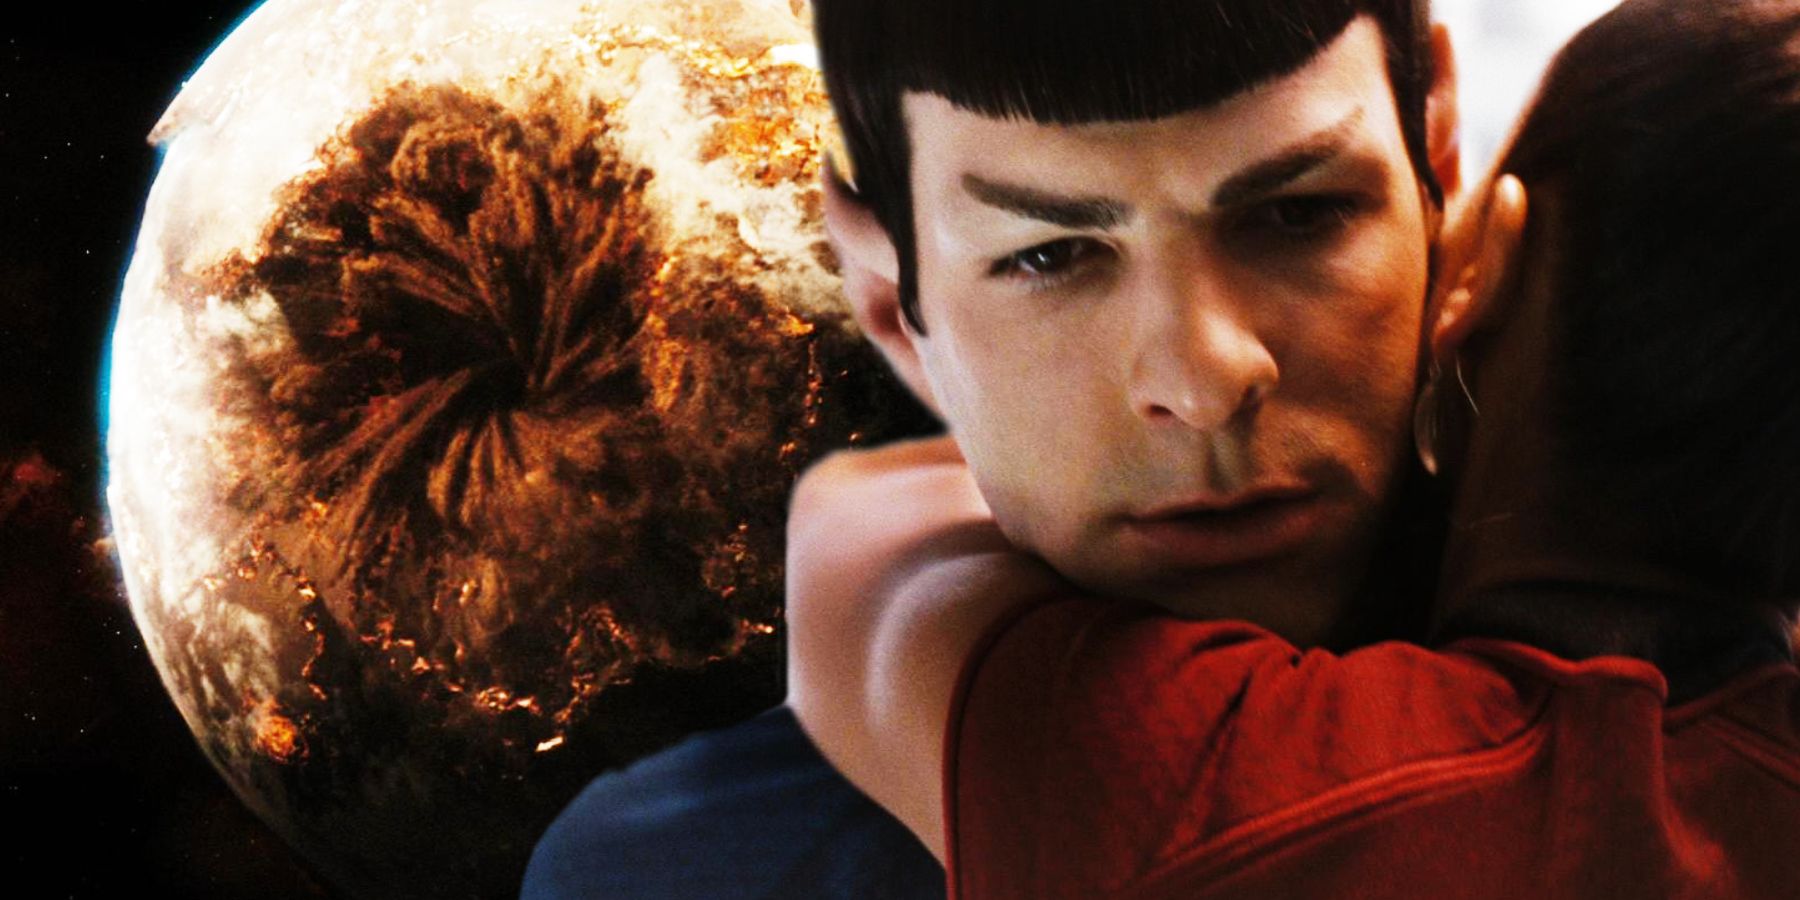 Vulcan destroyed while Spock and Uhura embrace